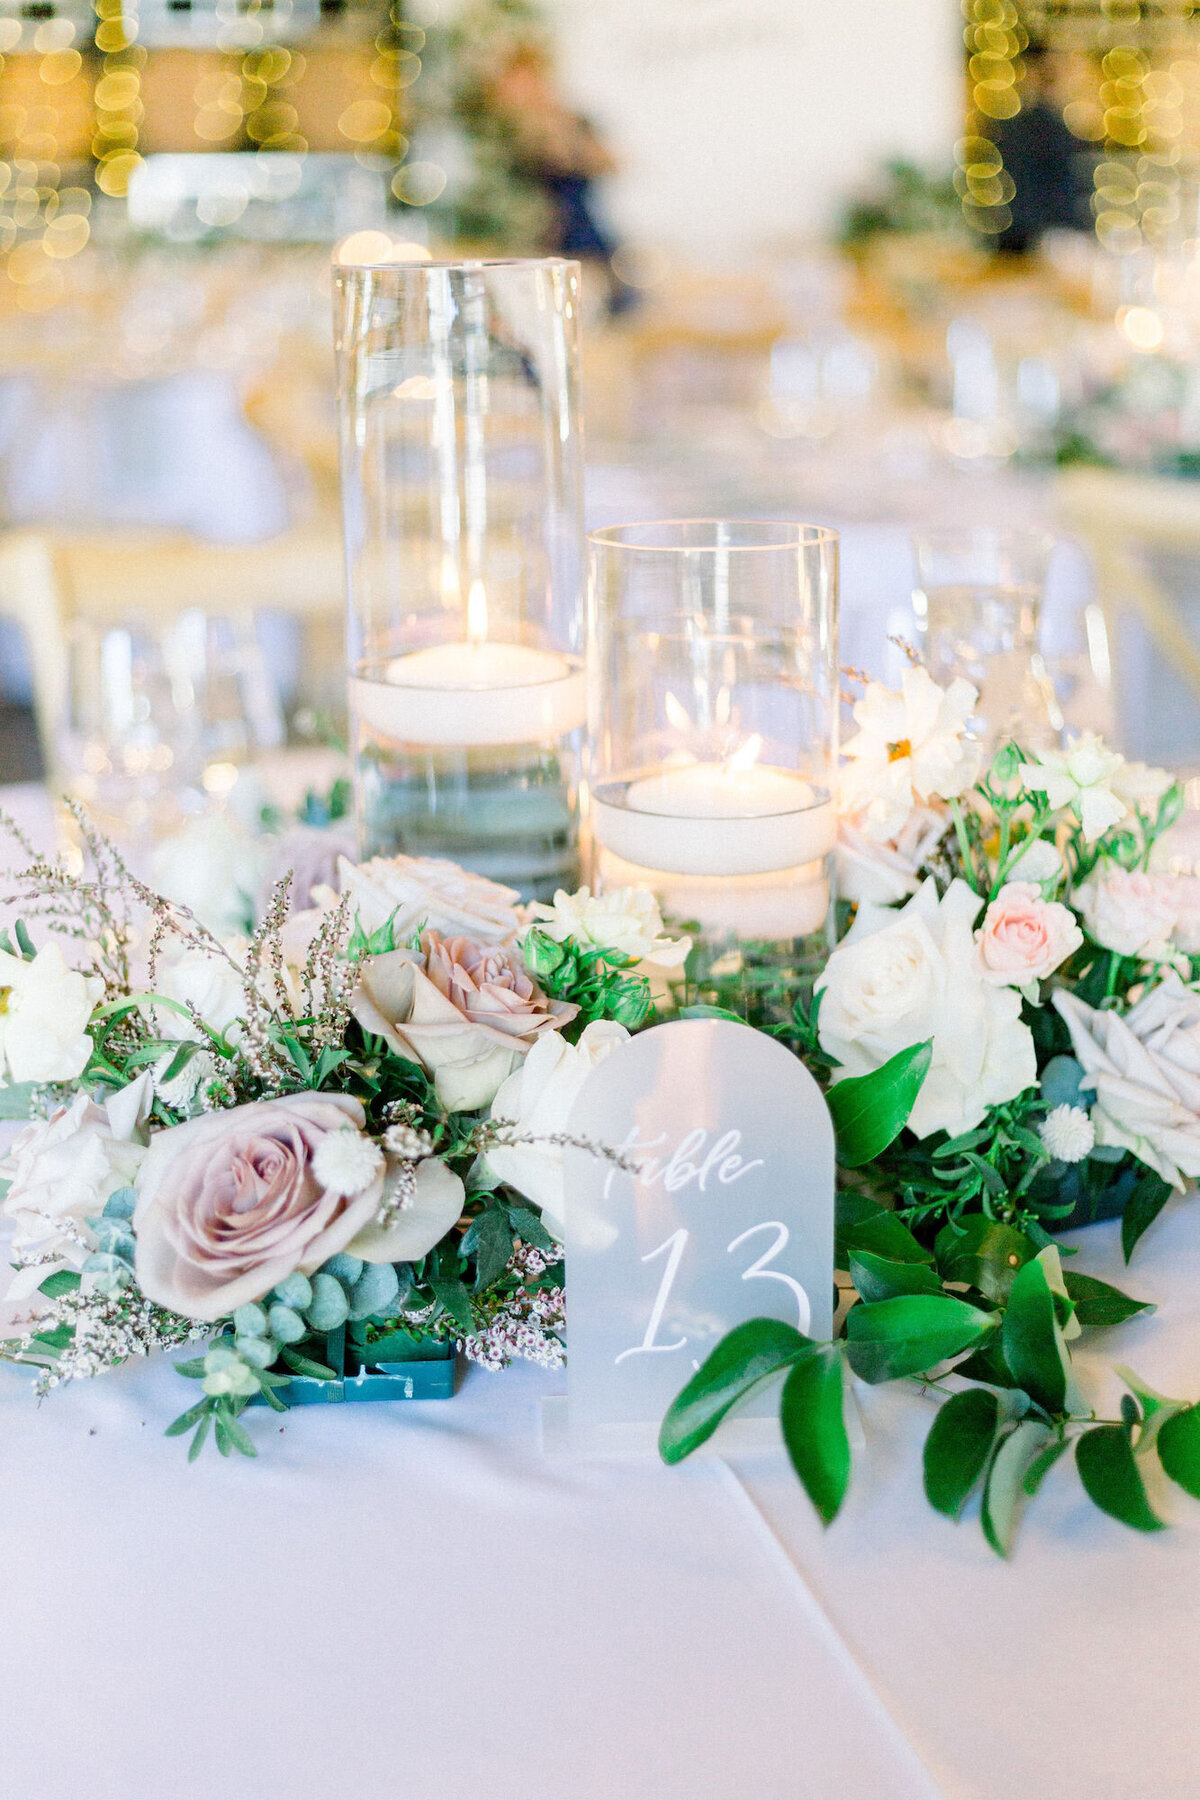 Floral tablescape with roses, candles, and an arched table number